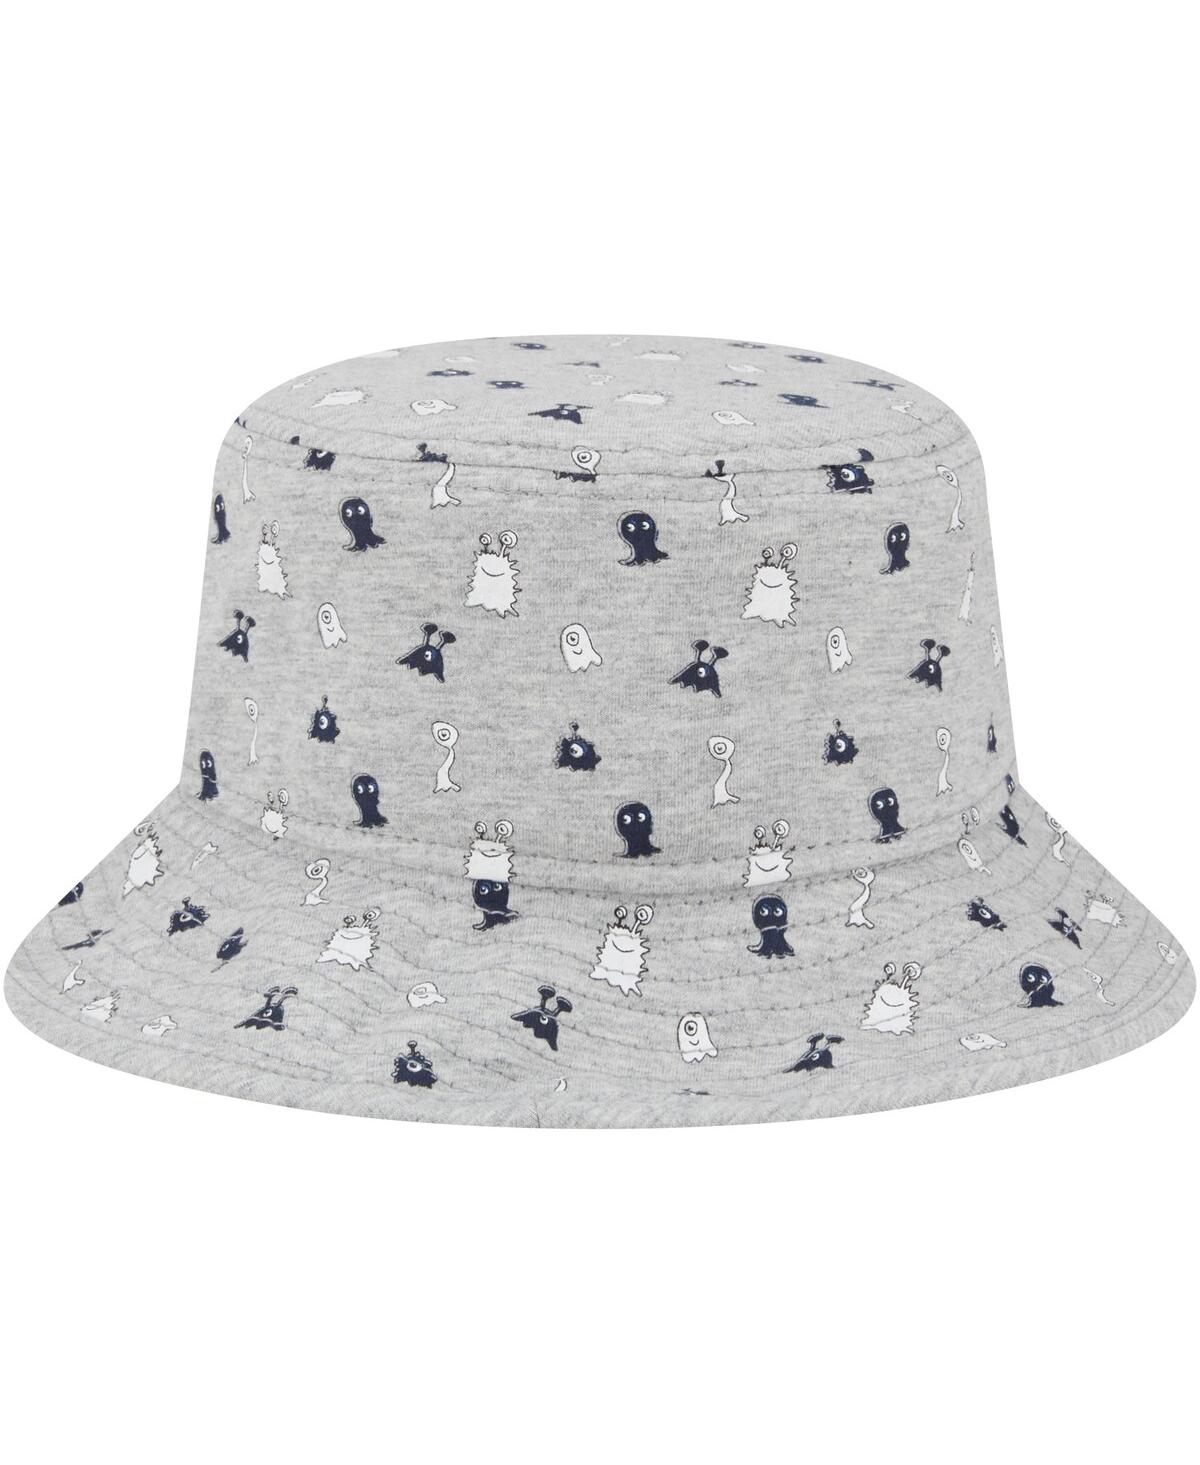 Shop New Era Toddler Boys And Girls  Heather Gray Penn State Nittany Lions Critter Bucket Hat